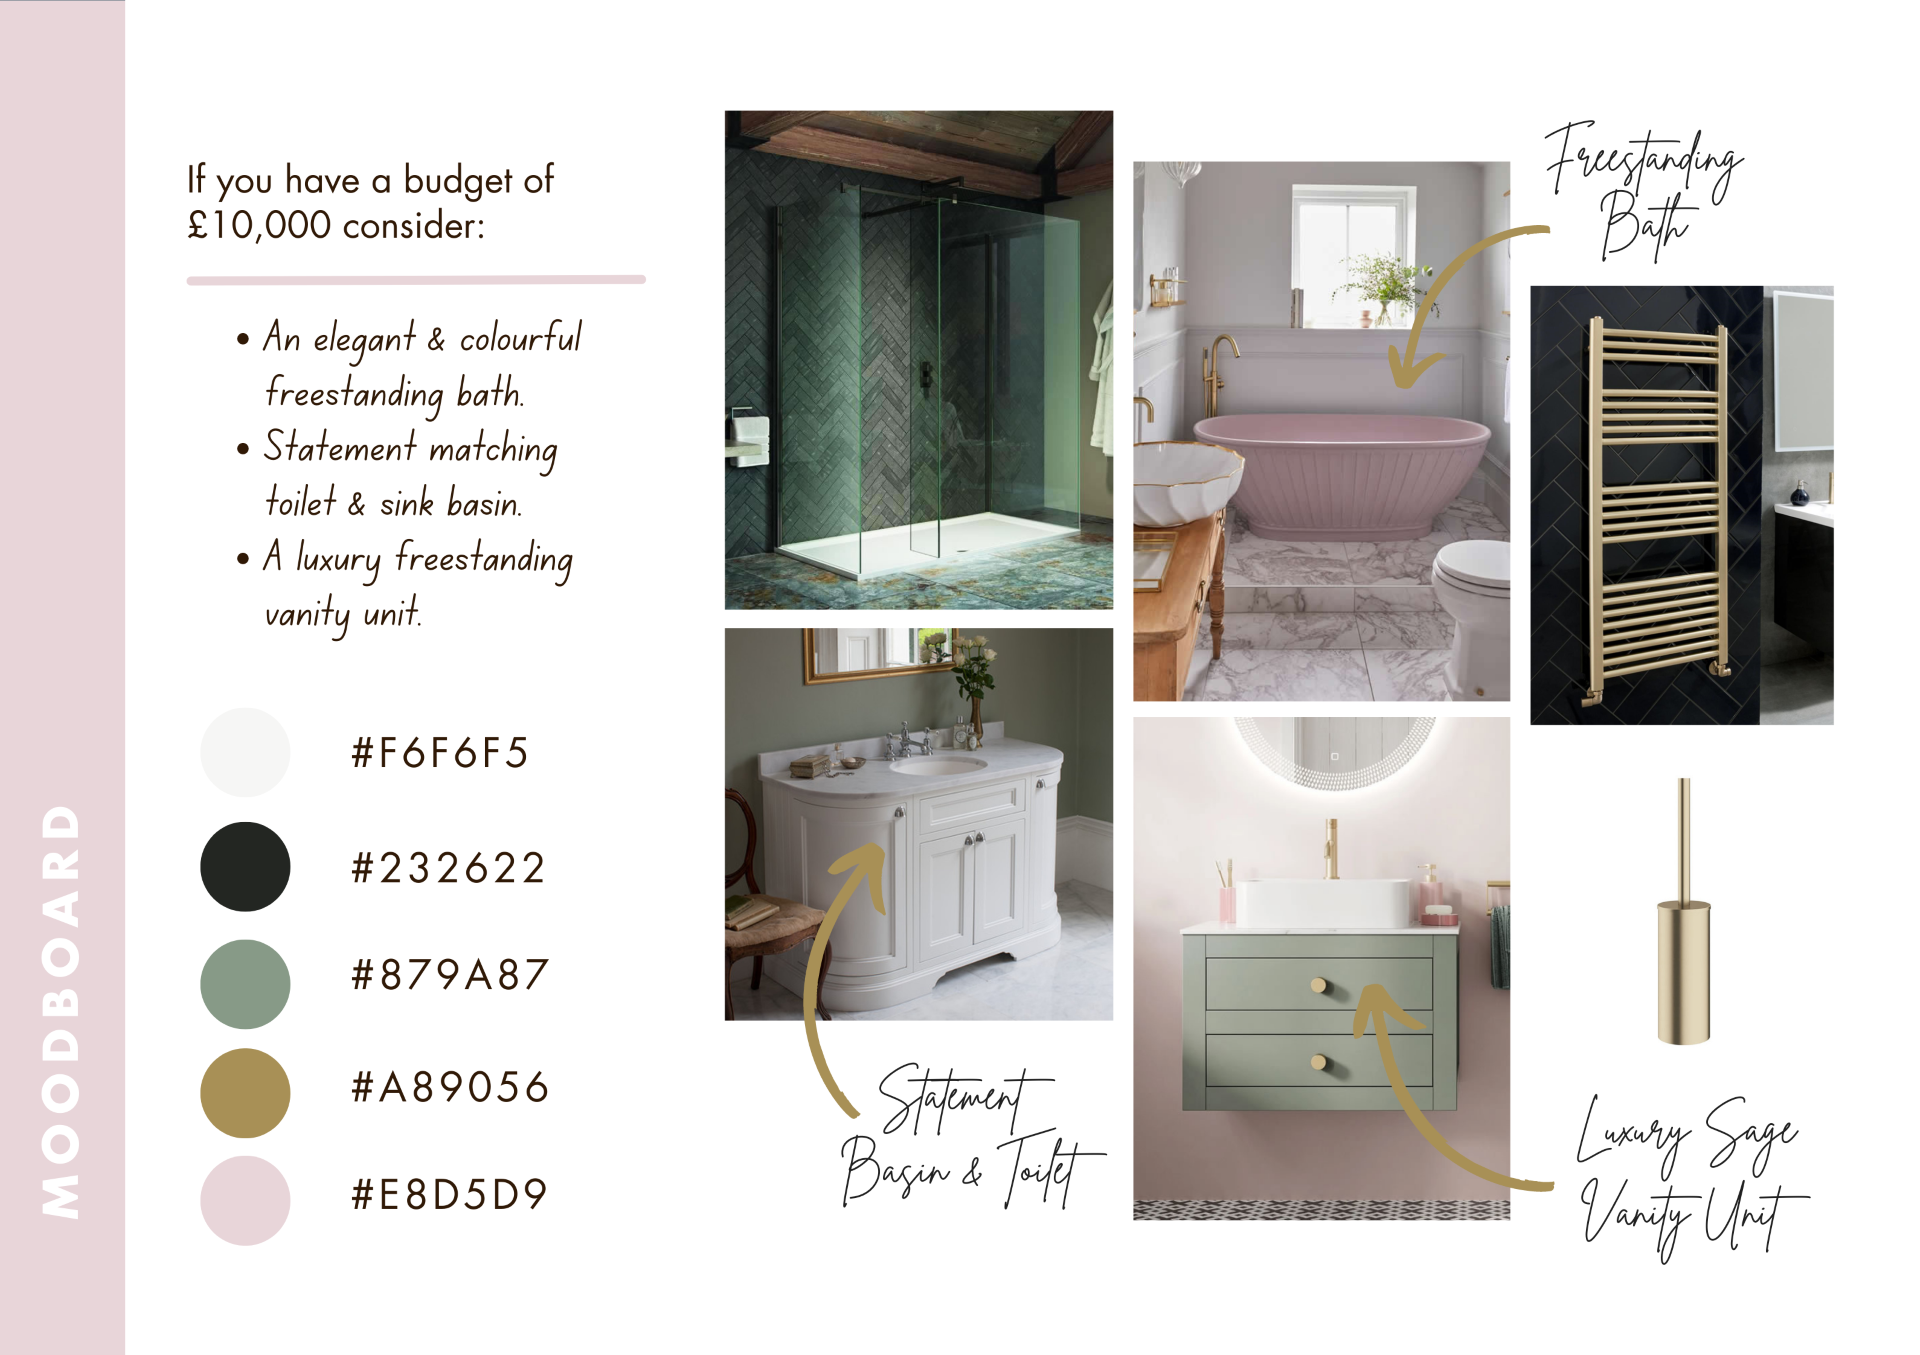 infographic showing moodboard of images for what can be done on a £10000 budget when renovating a bathroom